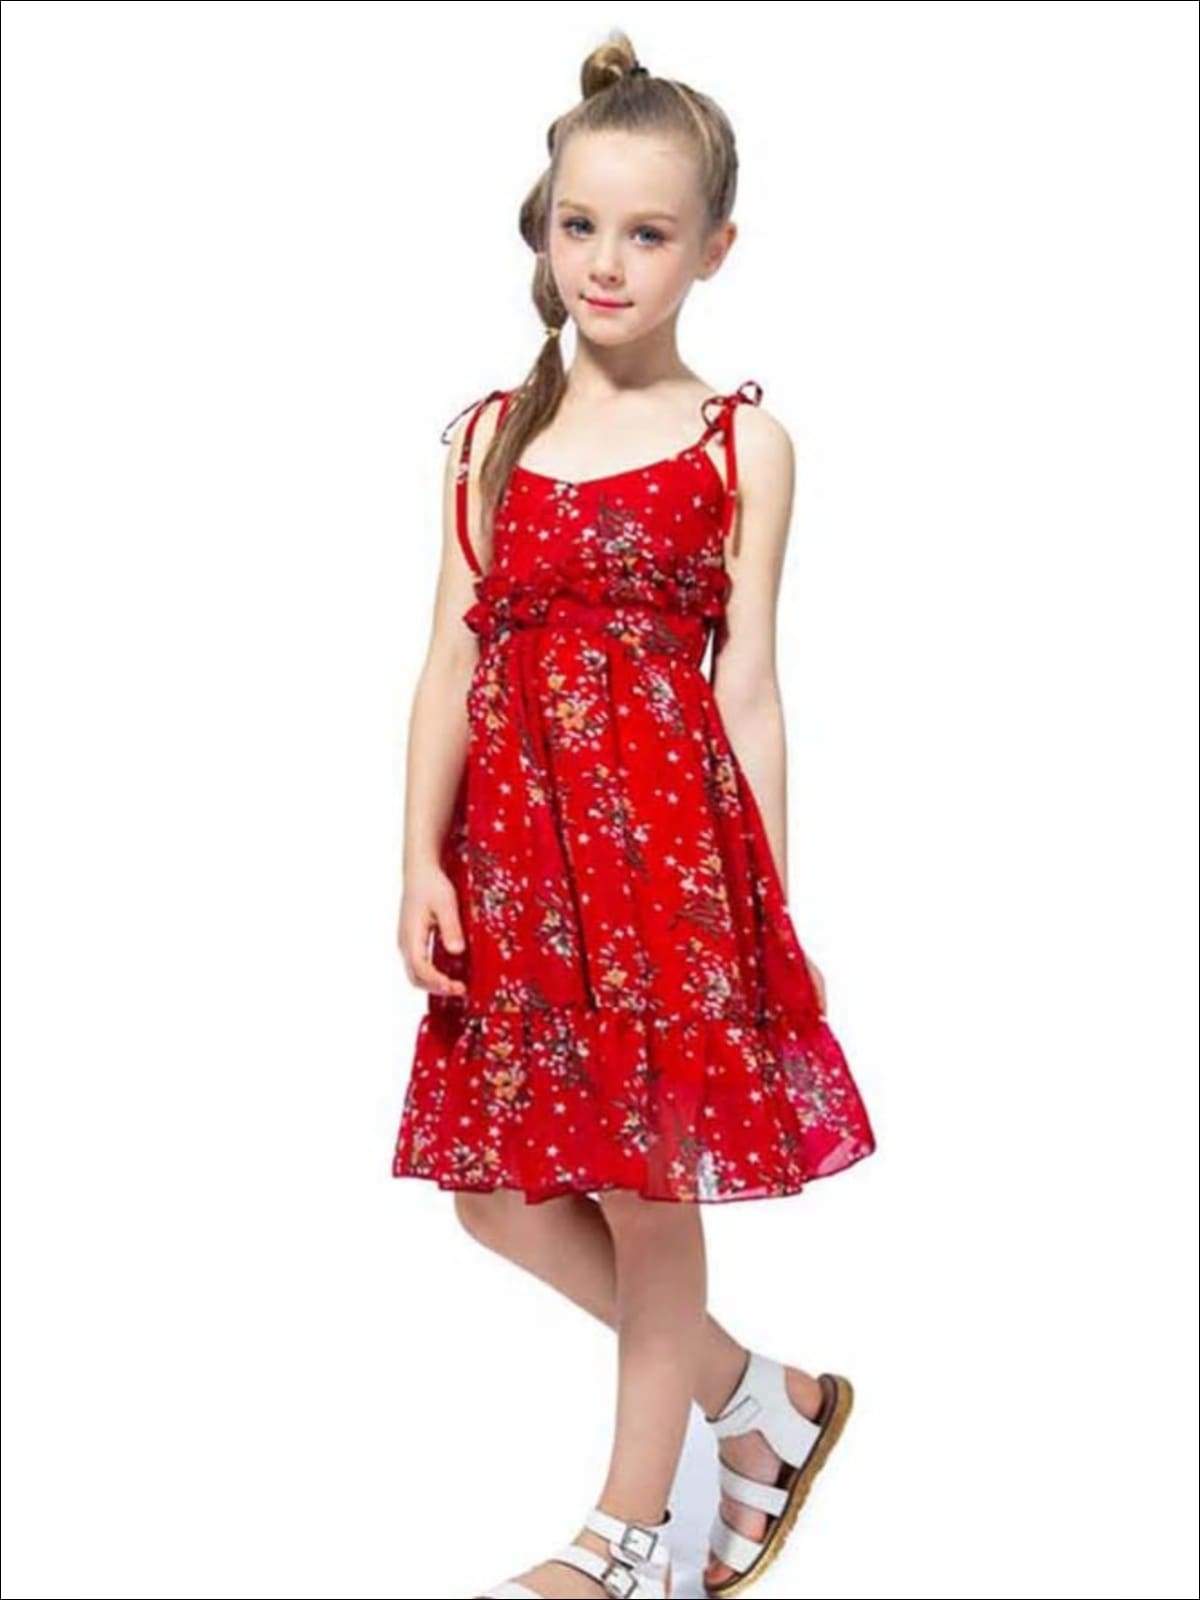 Girls Floral Sheer Ruffled Dress - Red Floral / 3T - Girls Spring Casual Dress